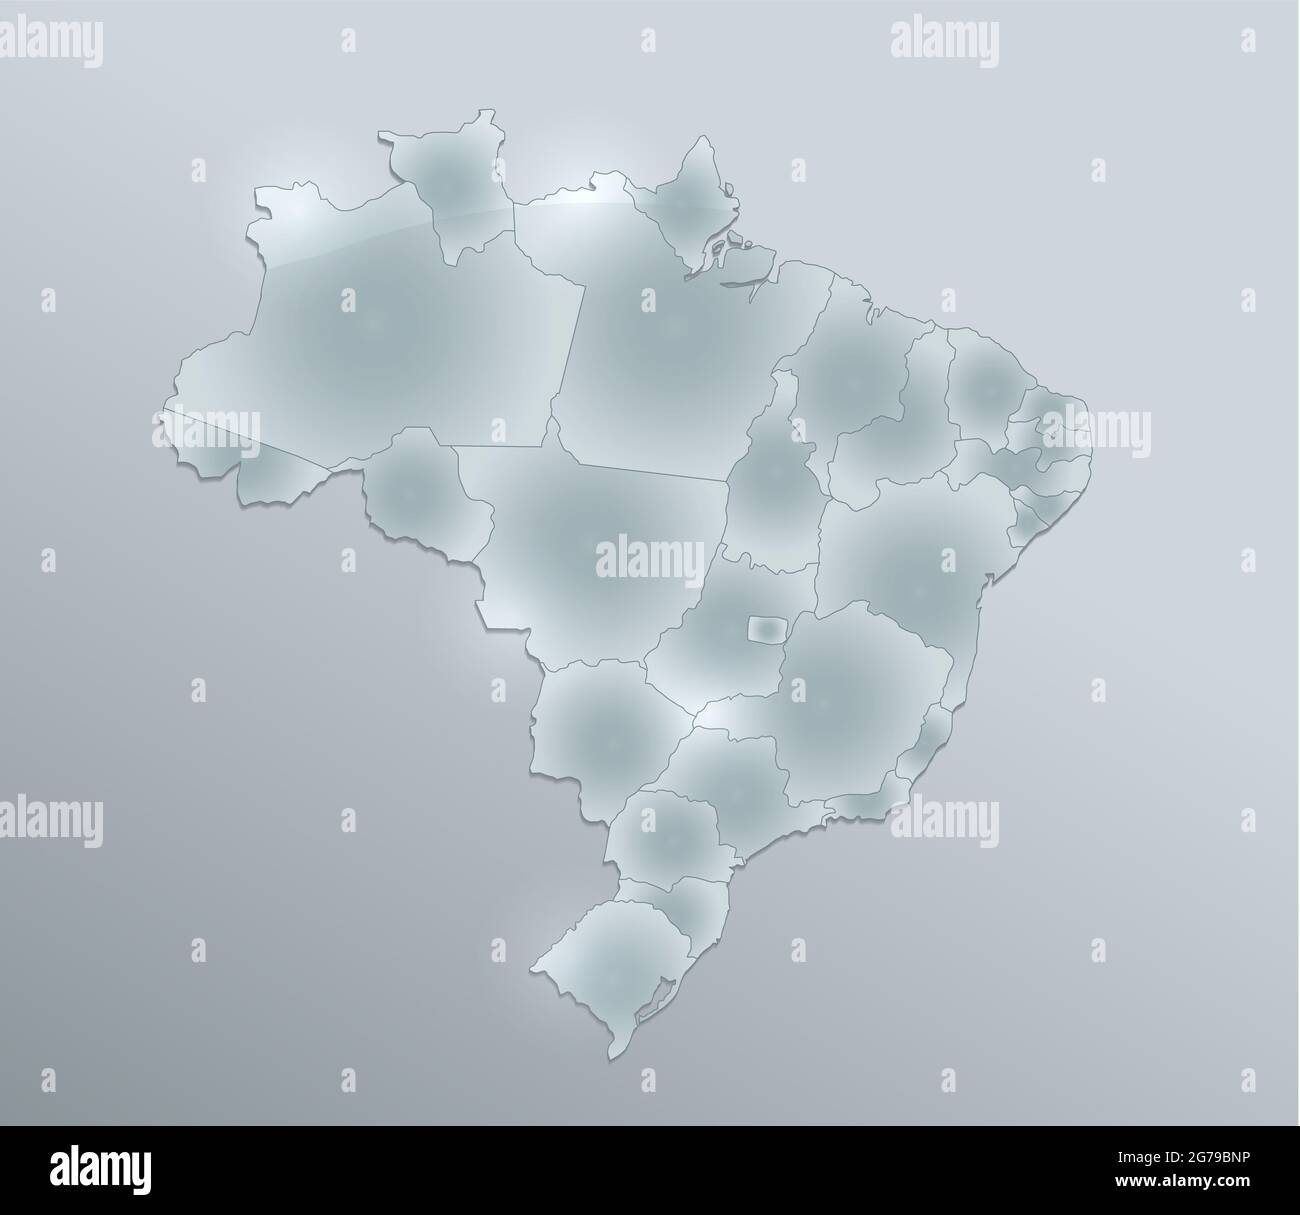 Brazil 3D shape image geographical location Stock Photo - Alamy